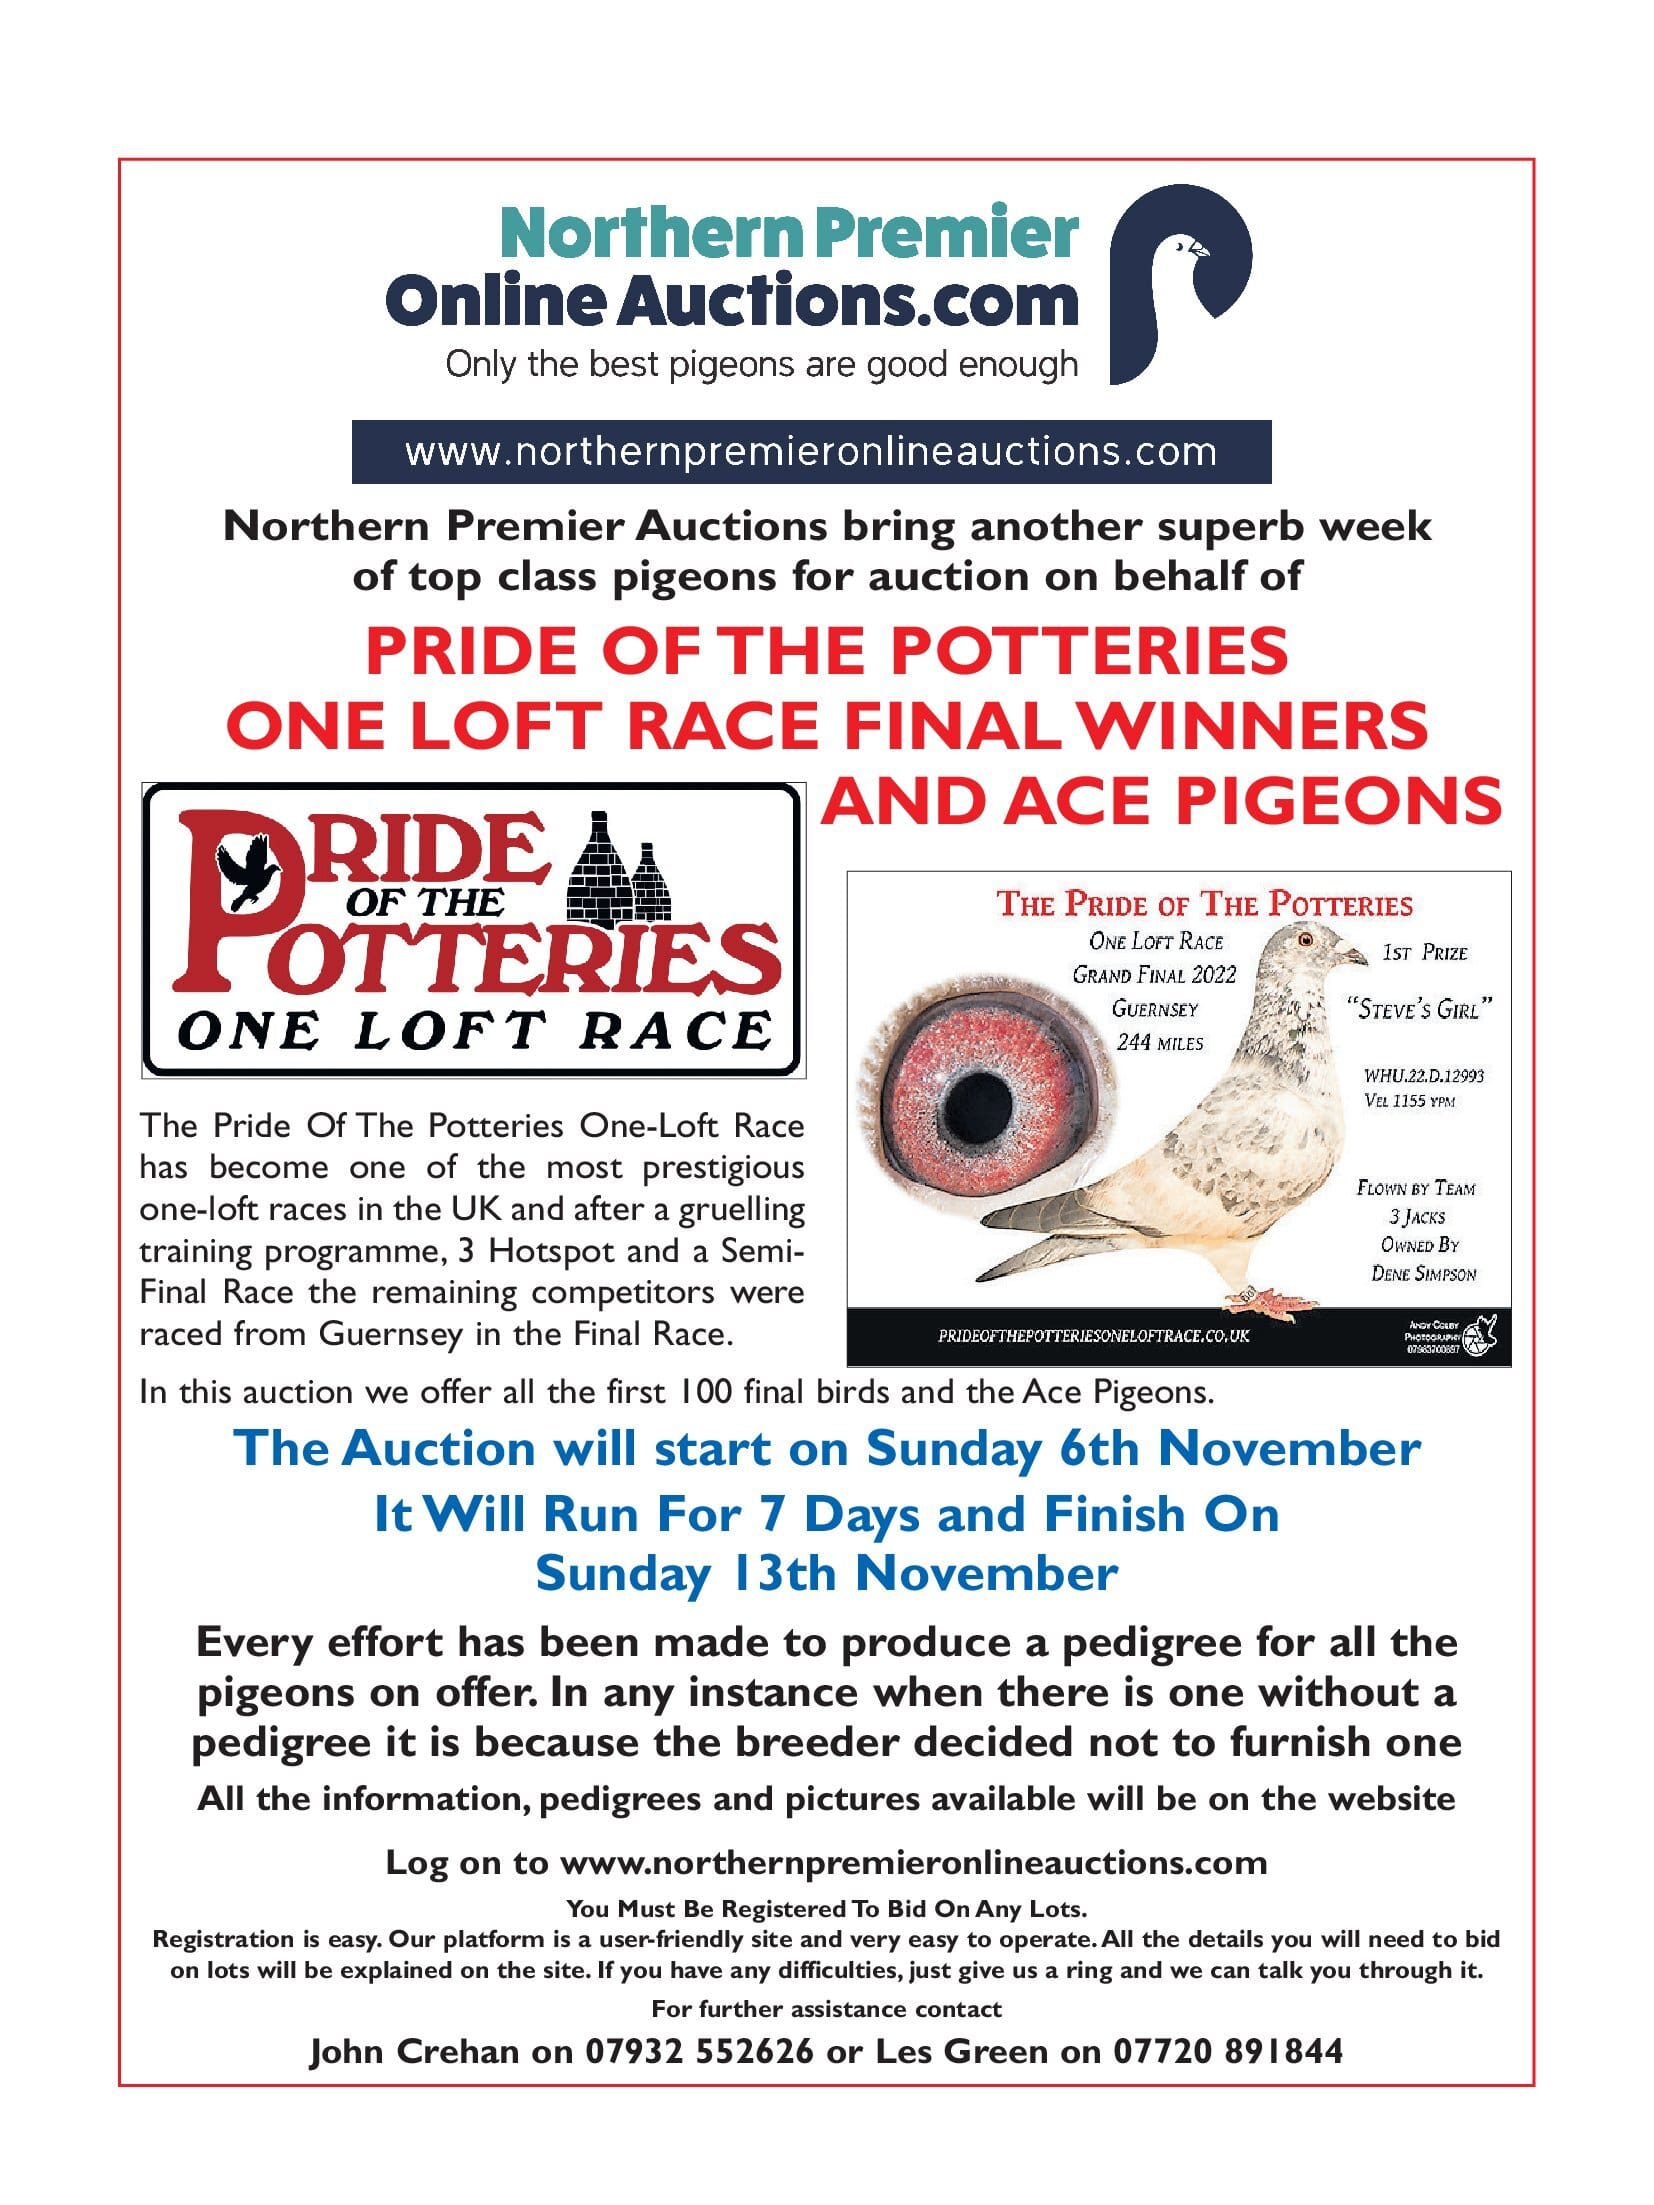 Northern Premier Auctions - Pride of the Potteries